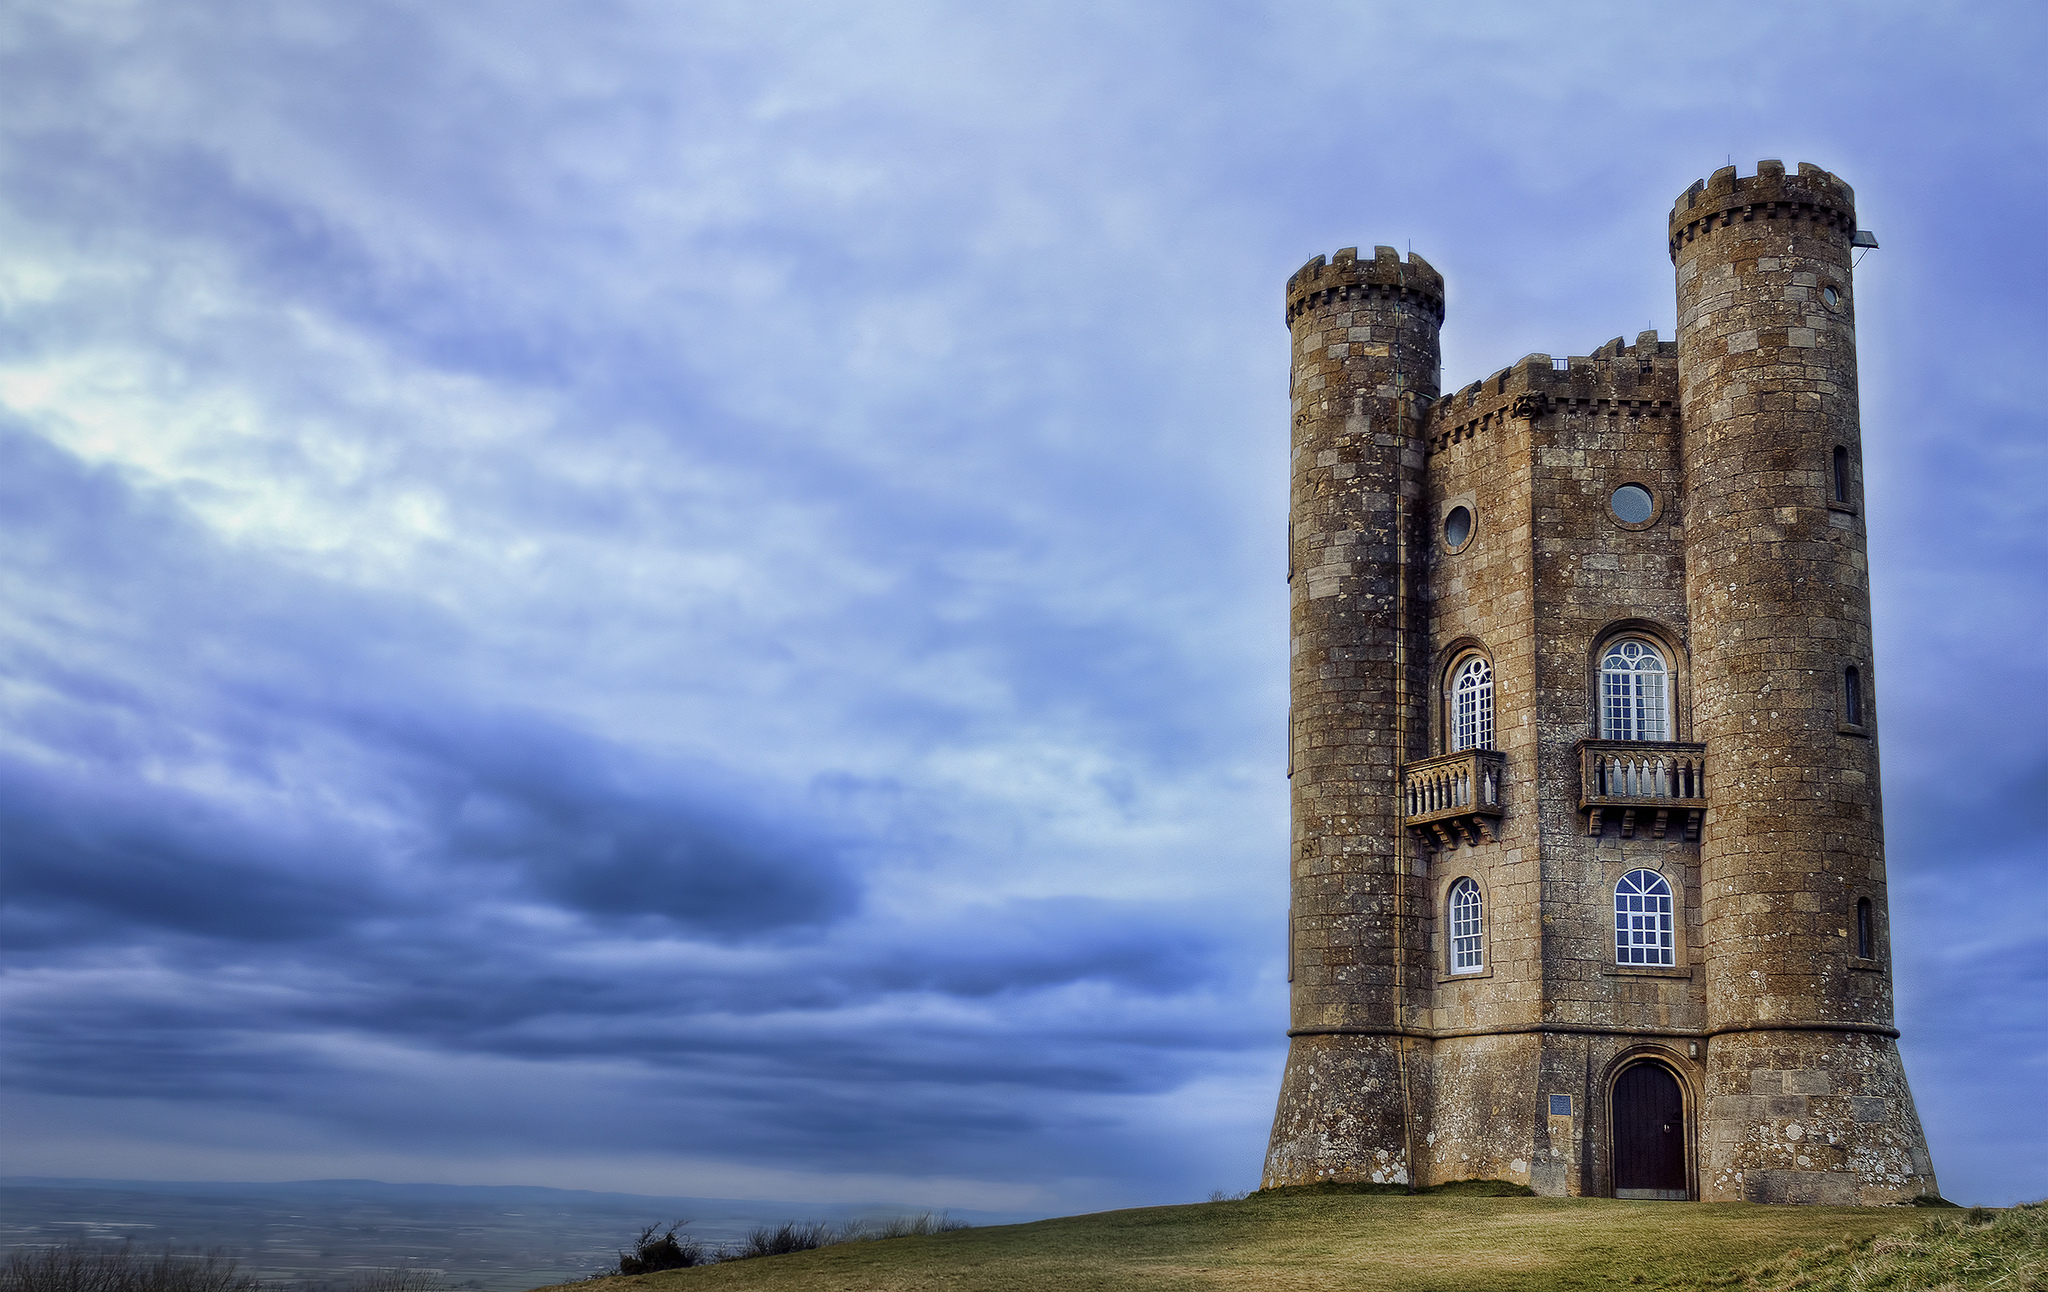 Broadway Tower, Worcestershire #16